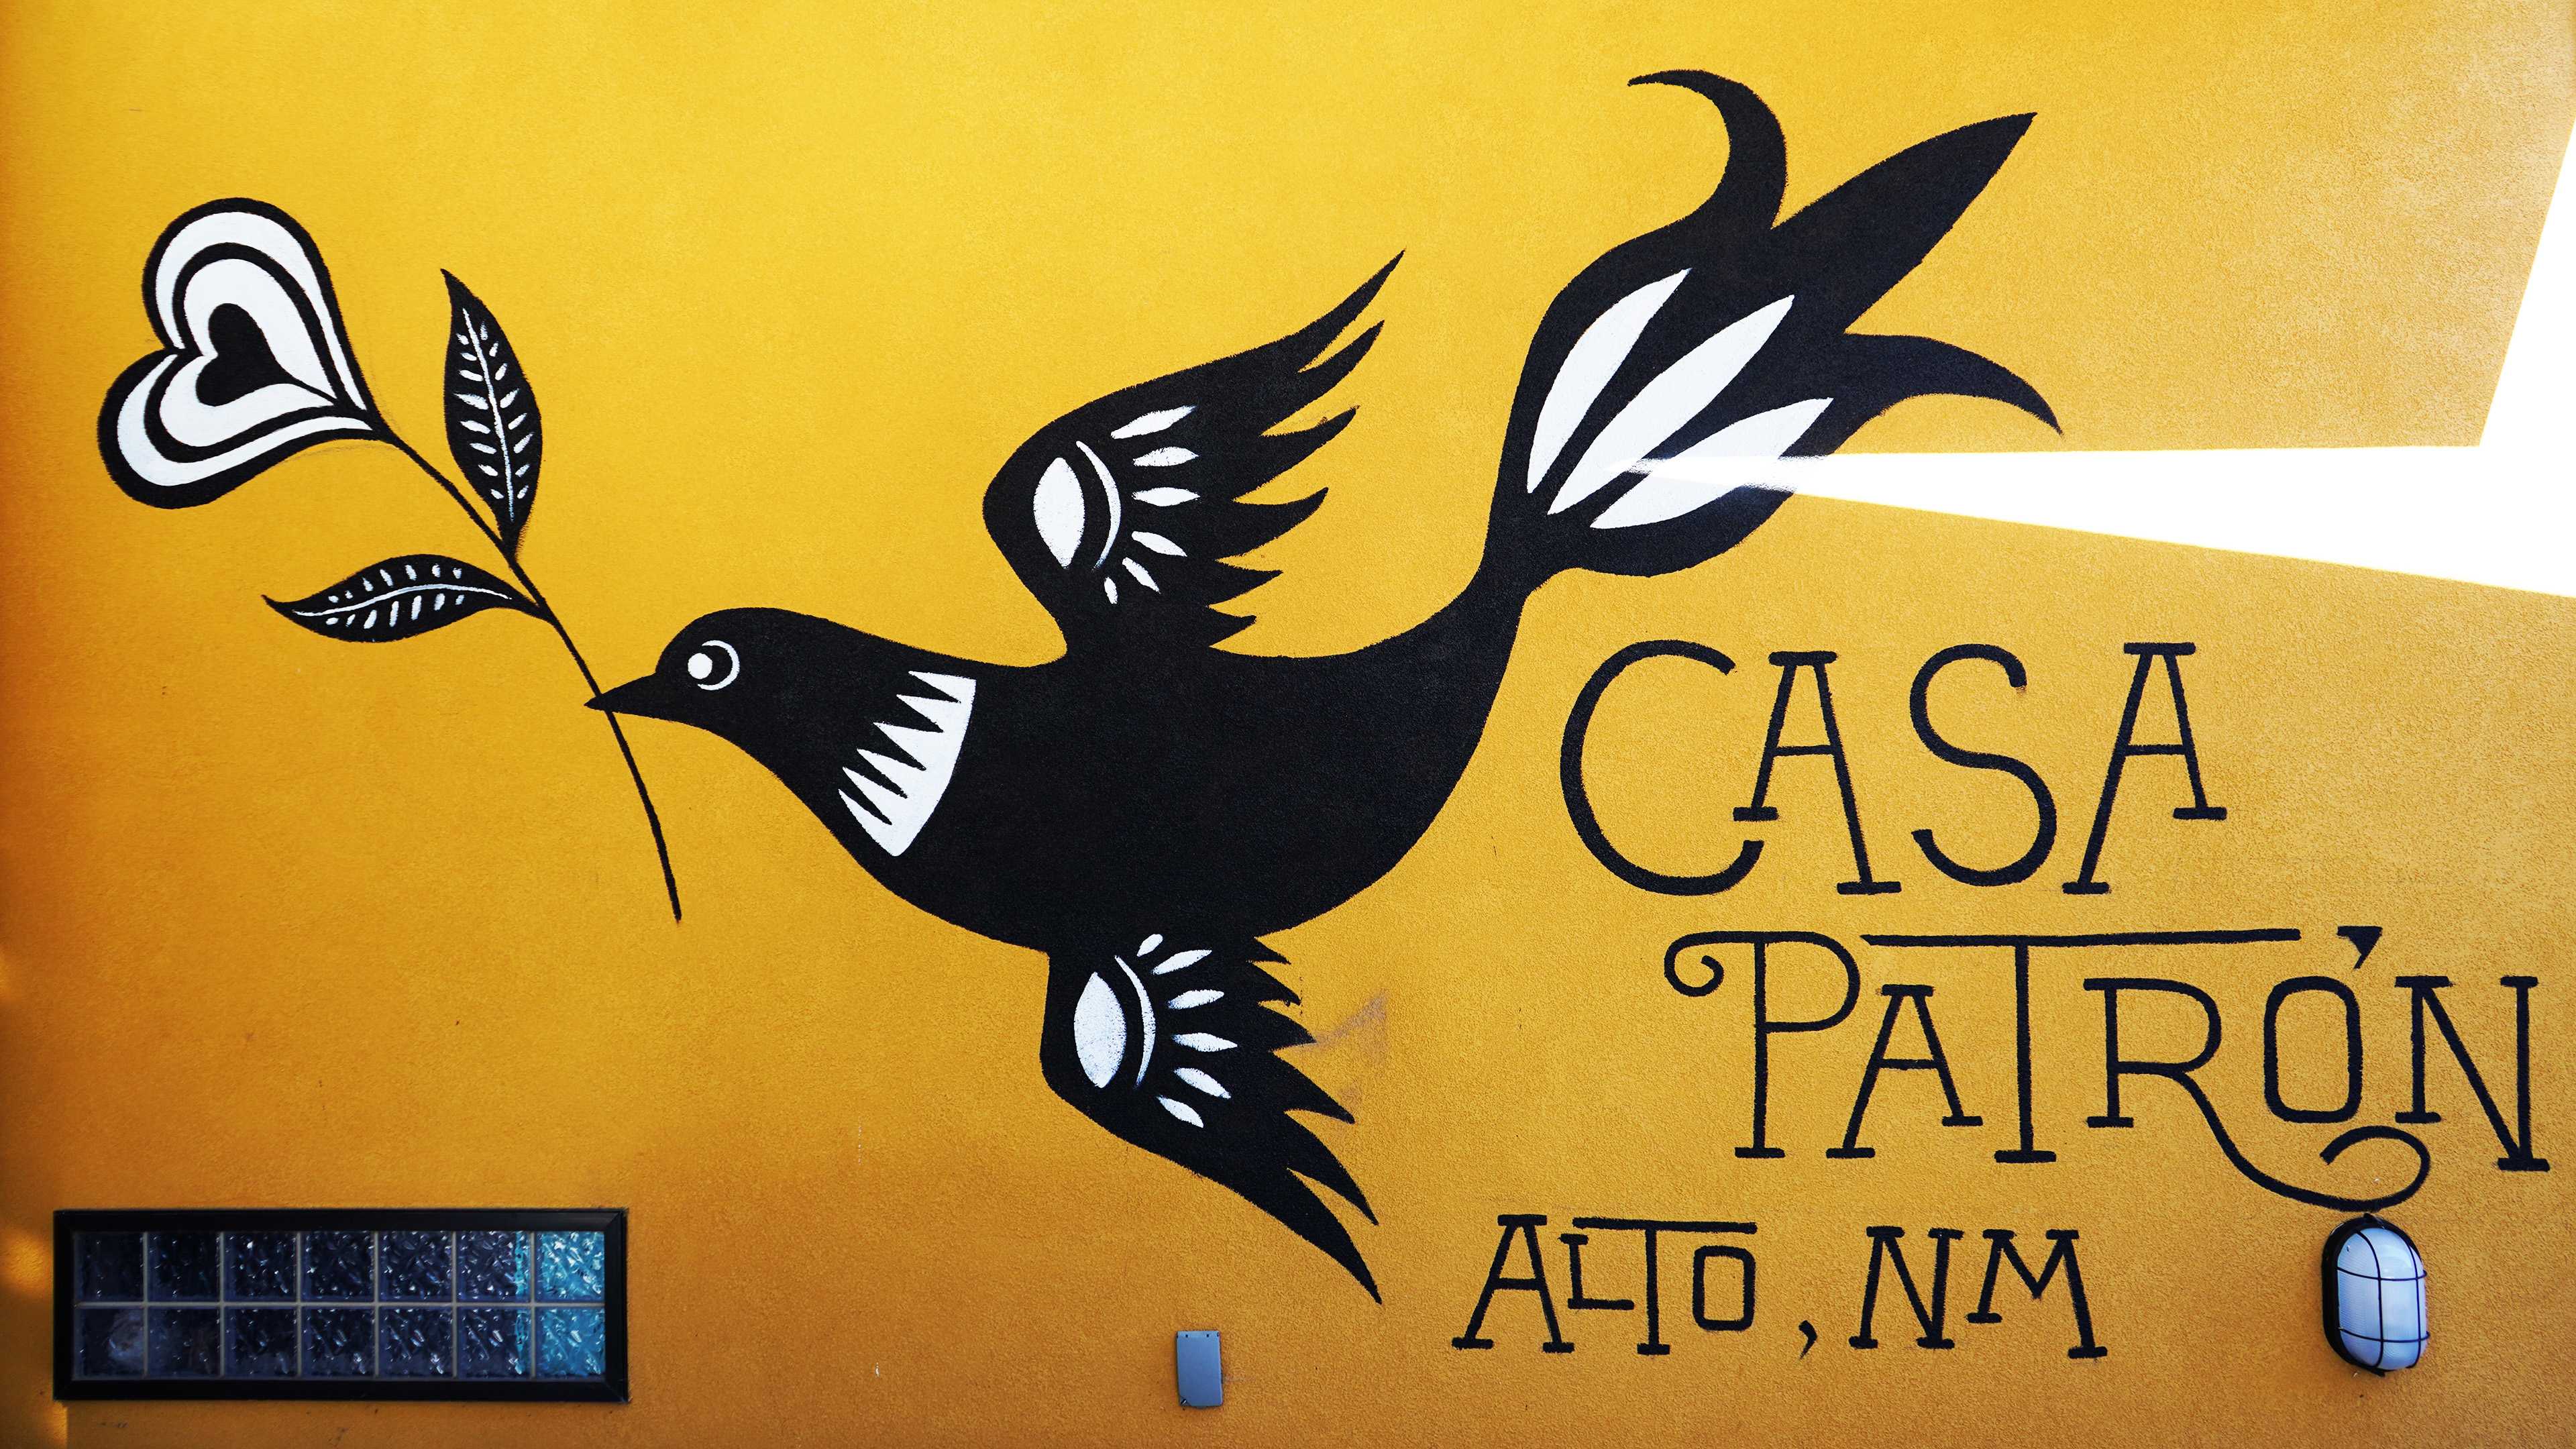 The Casa Patron mural, a black bird painted over a yellow background.